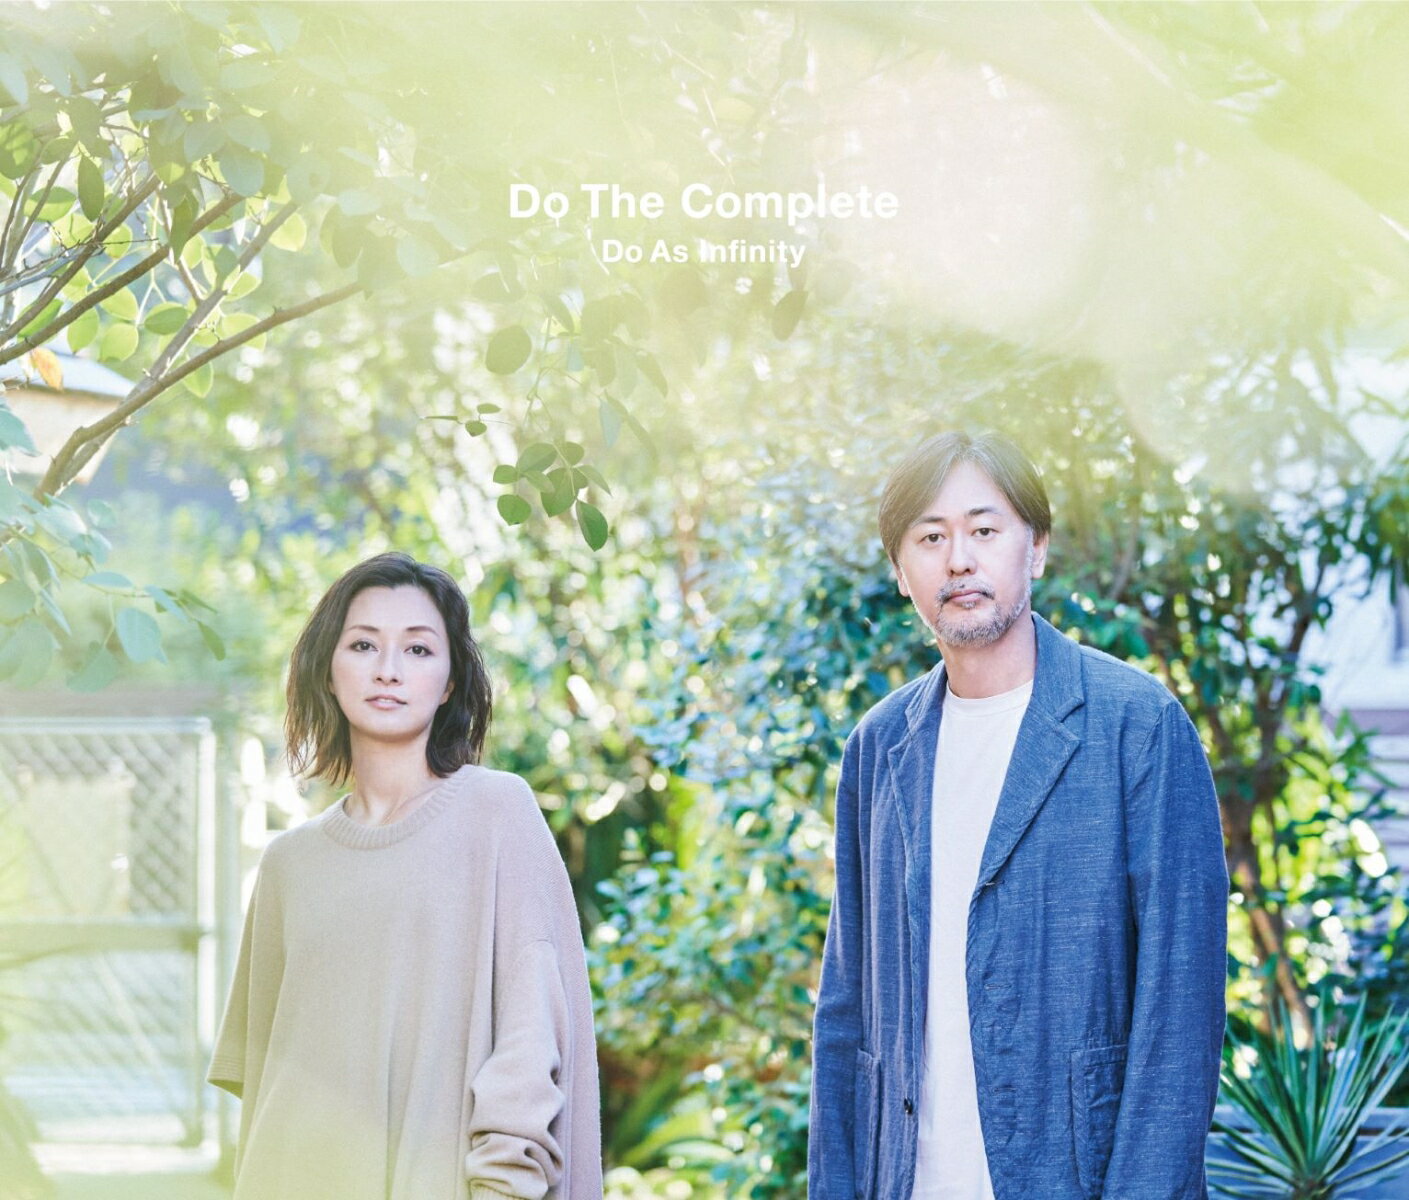 Do The Complete (3CD＋Blu-ray＋スマプラ)